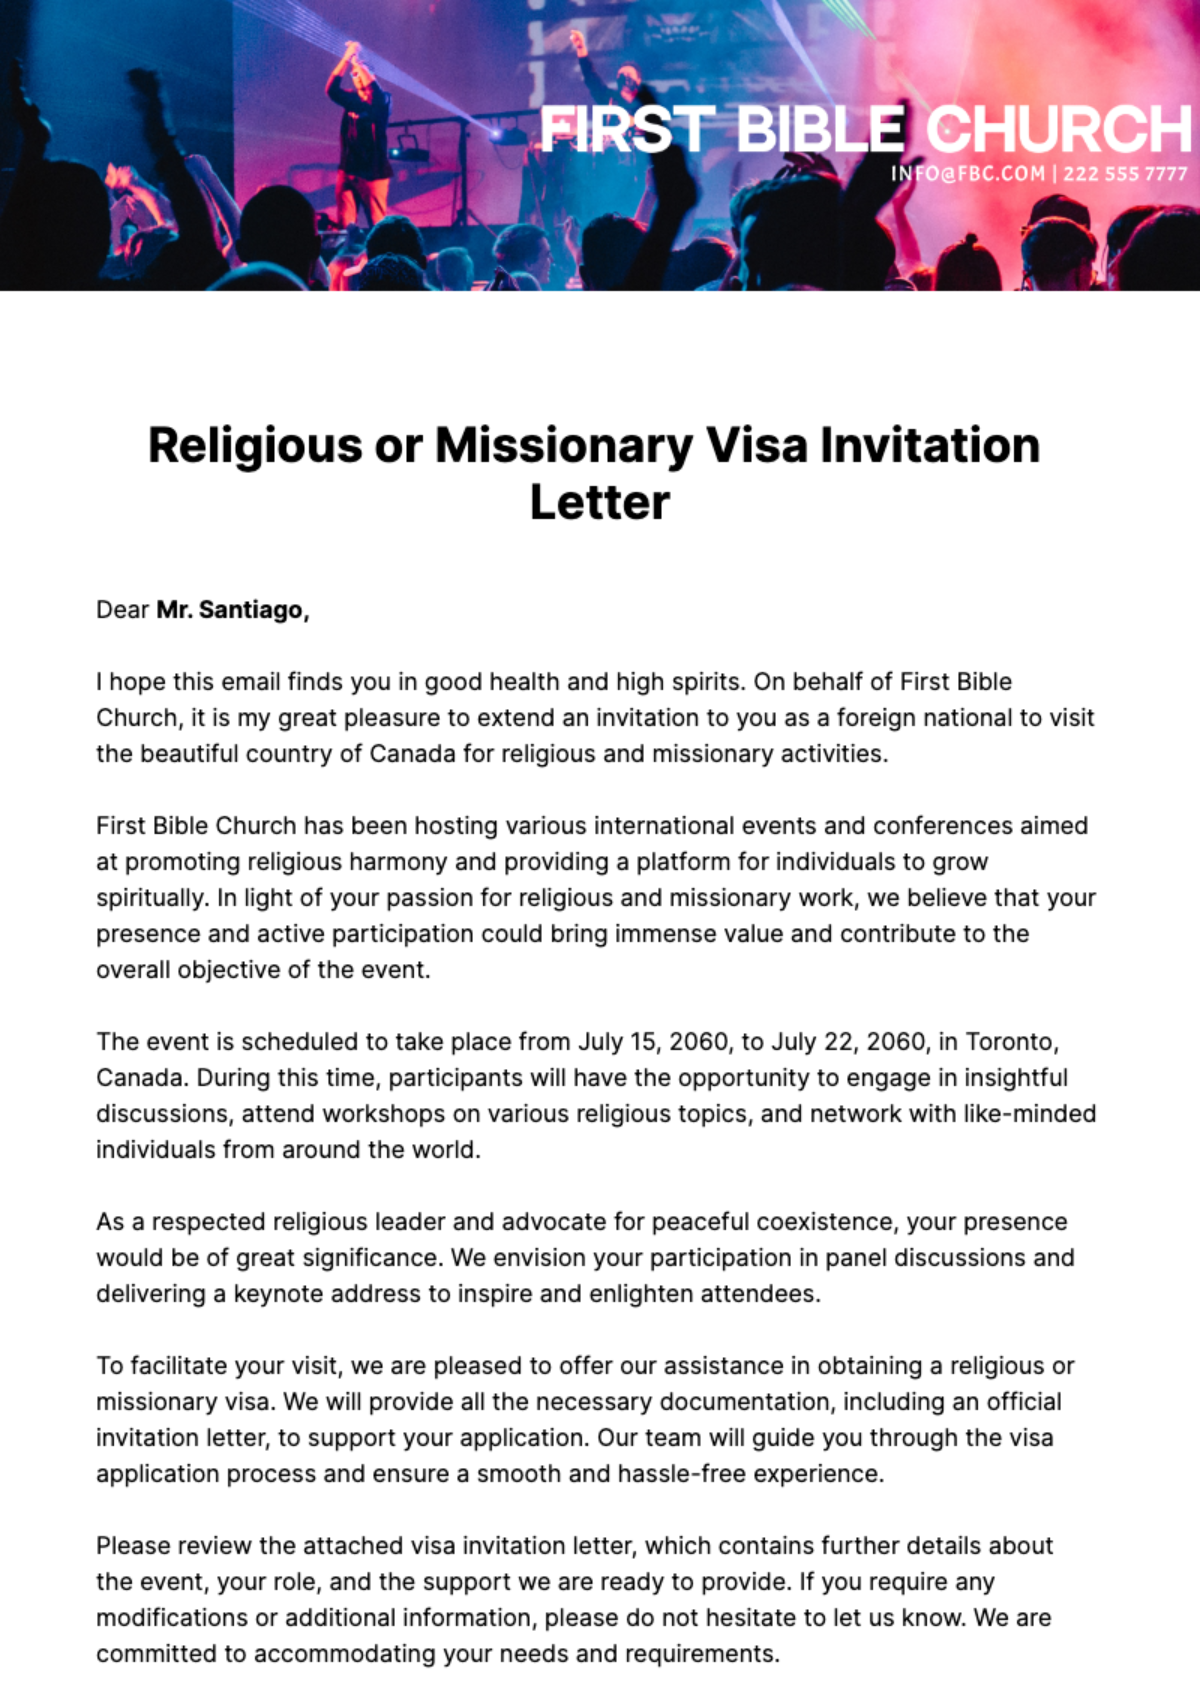 Religious or Missionary Visa Invitation Letter Template